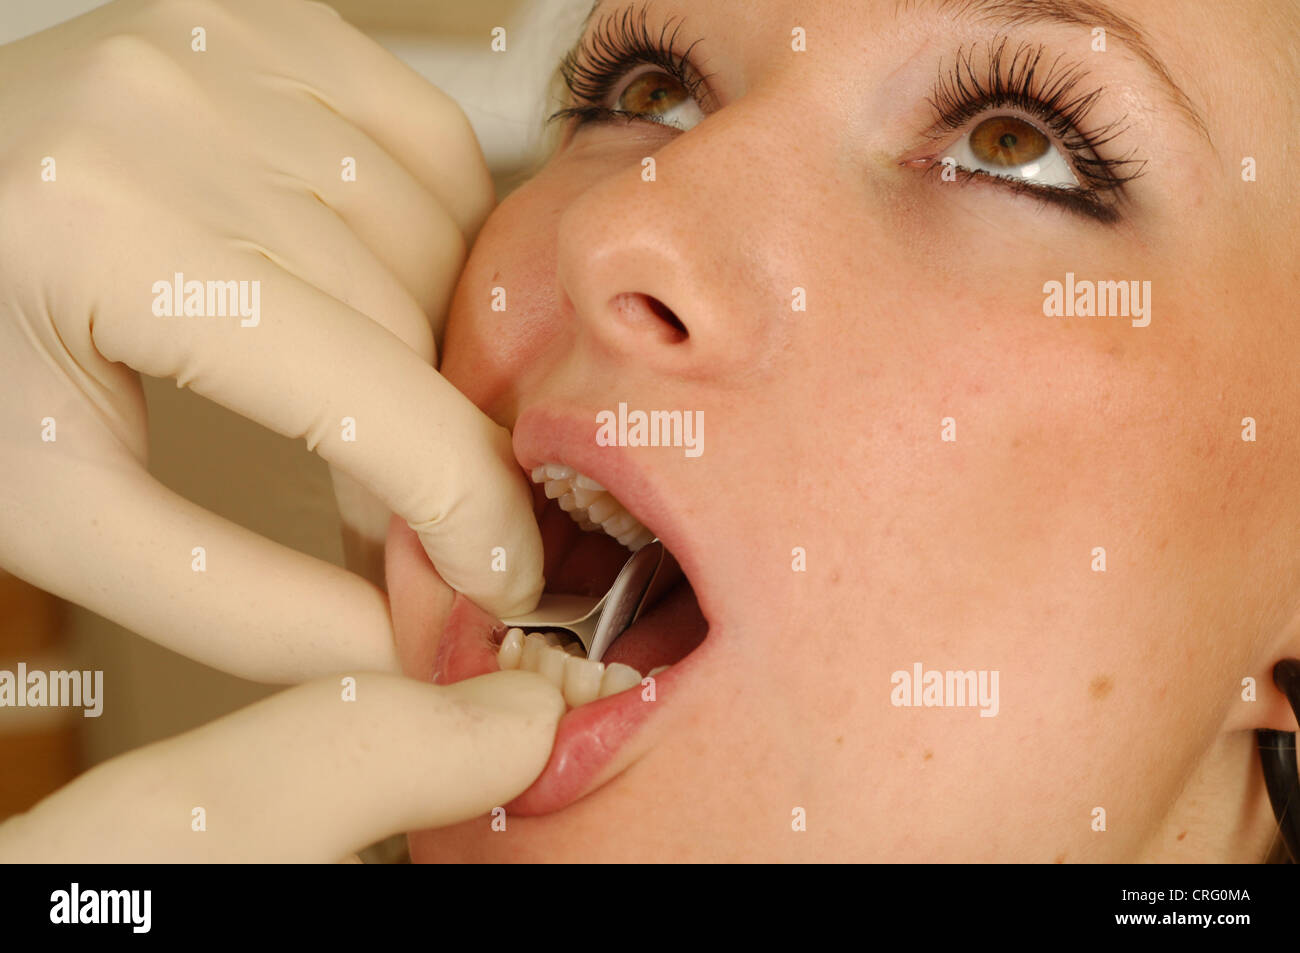 Dentist prepares a young female's mouth for an x-ray. Stock Photo